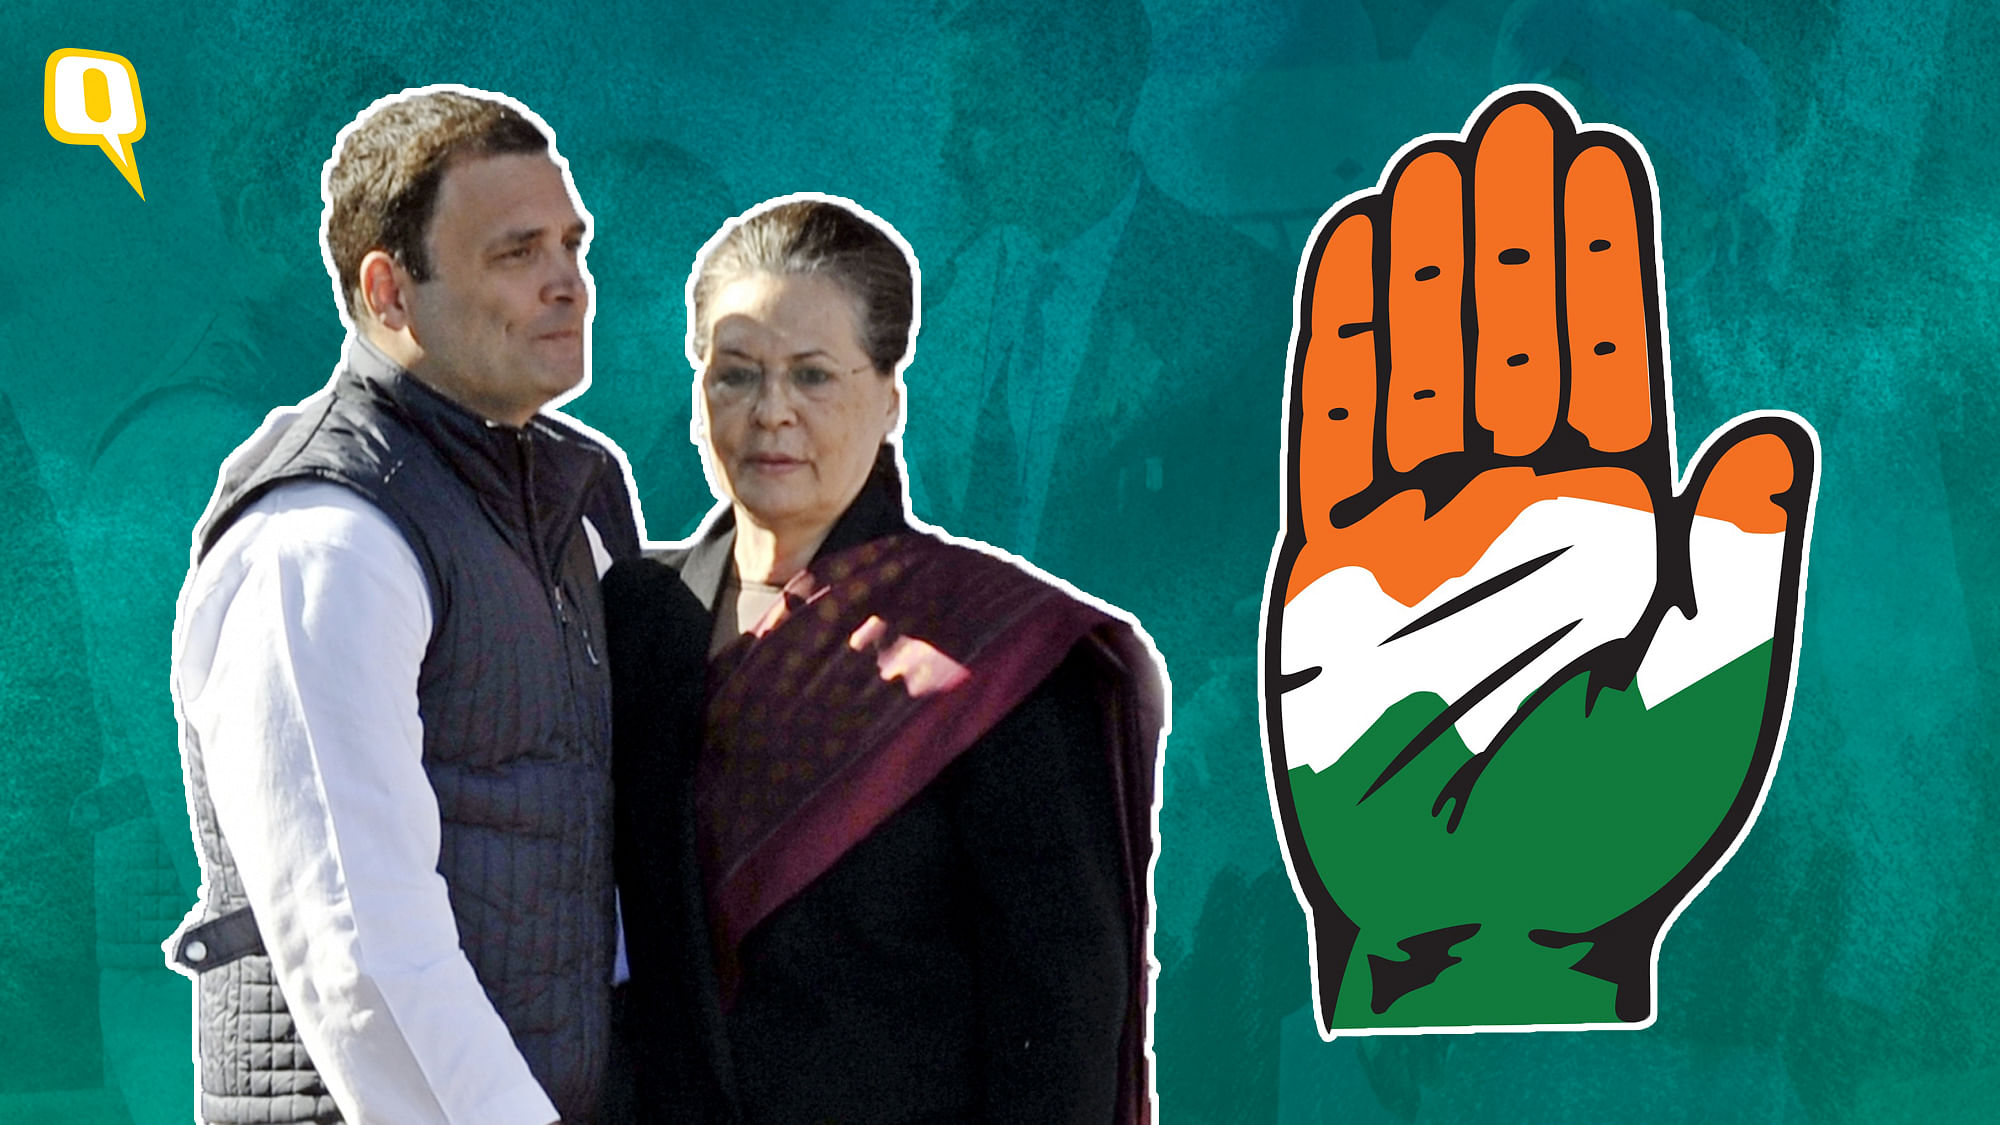 Newly elected Congress president Rahul Gandhi greets his mother and predecessor Sonia Gandhi during a grand elevation event in New Delhi on Saturday.